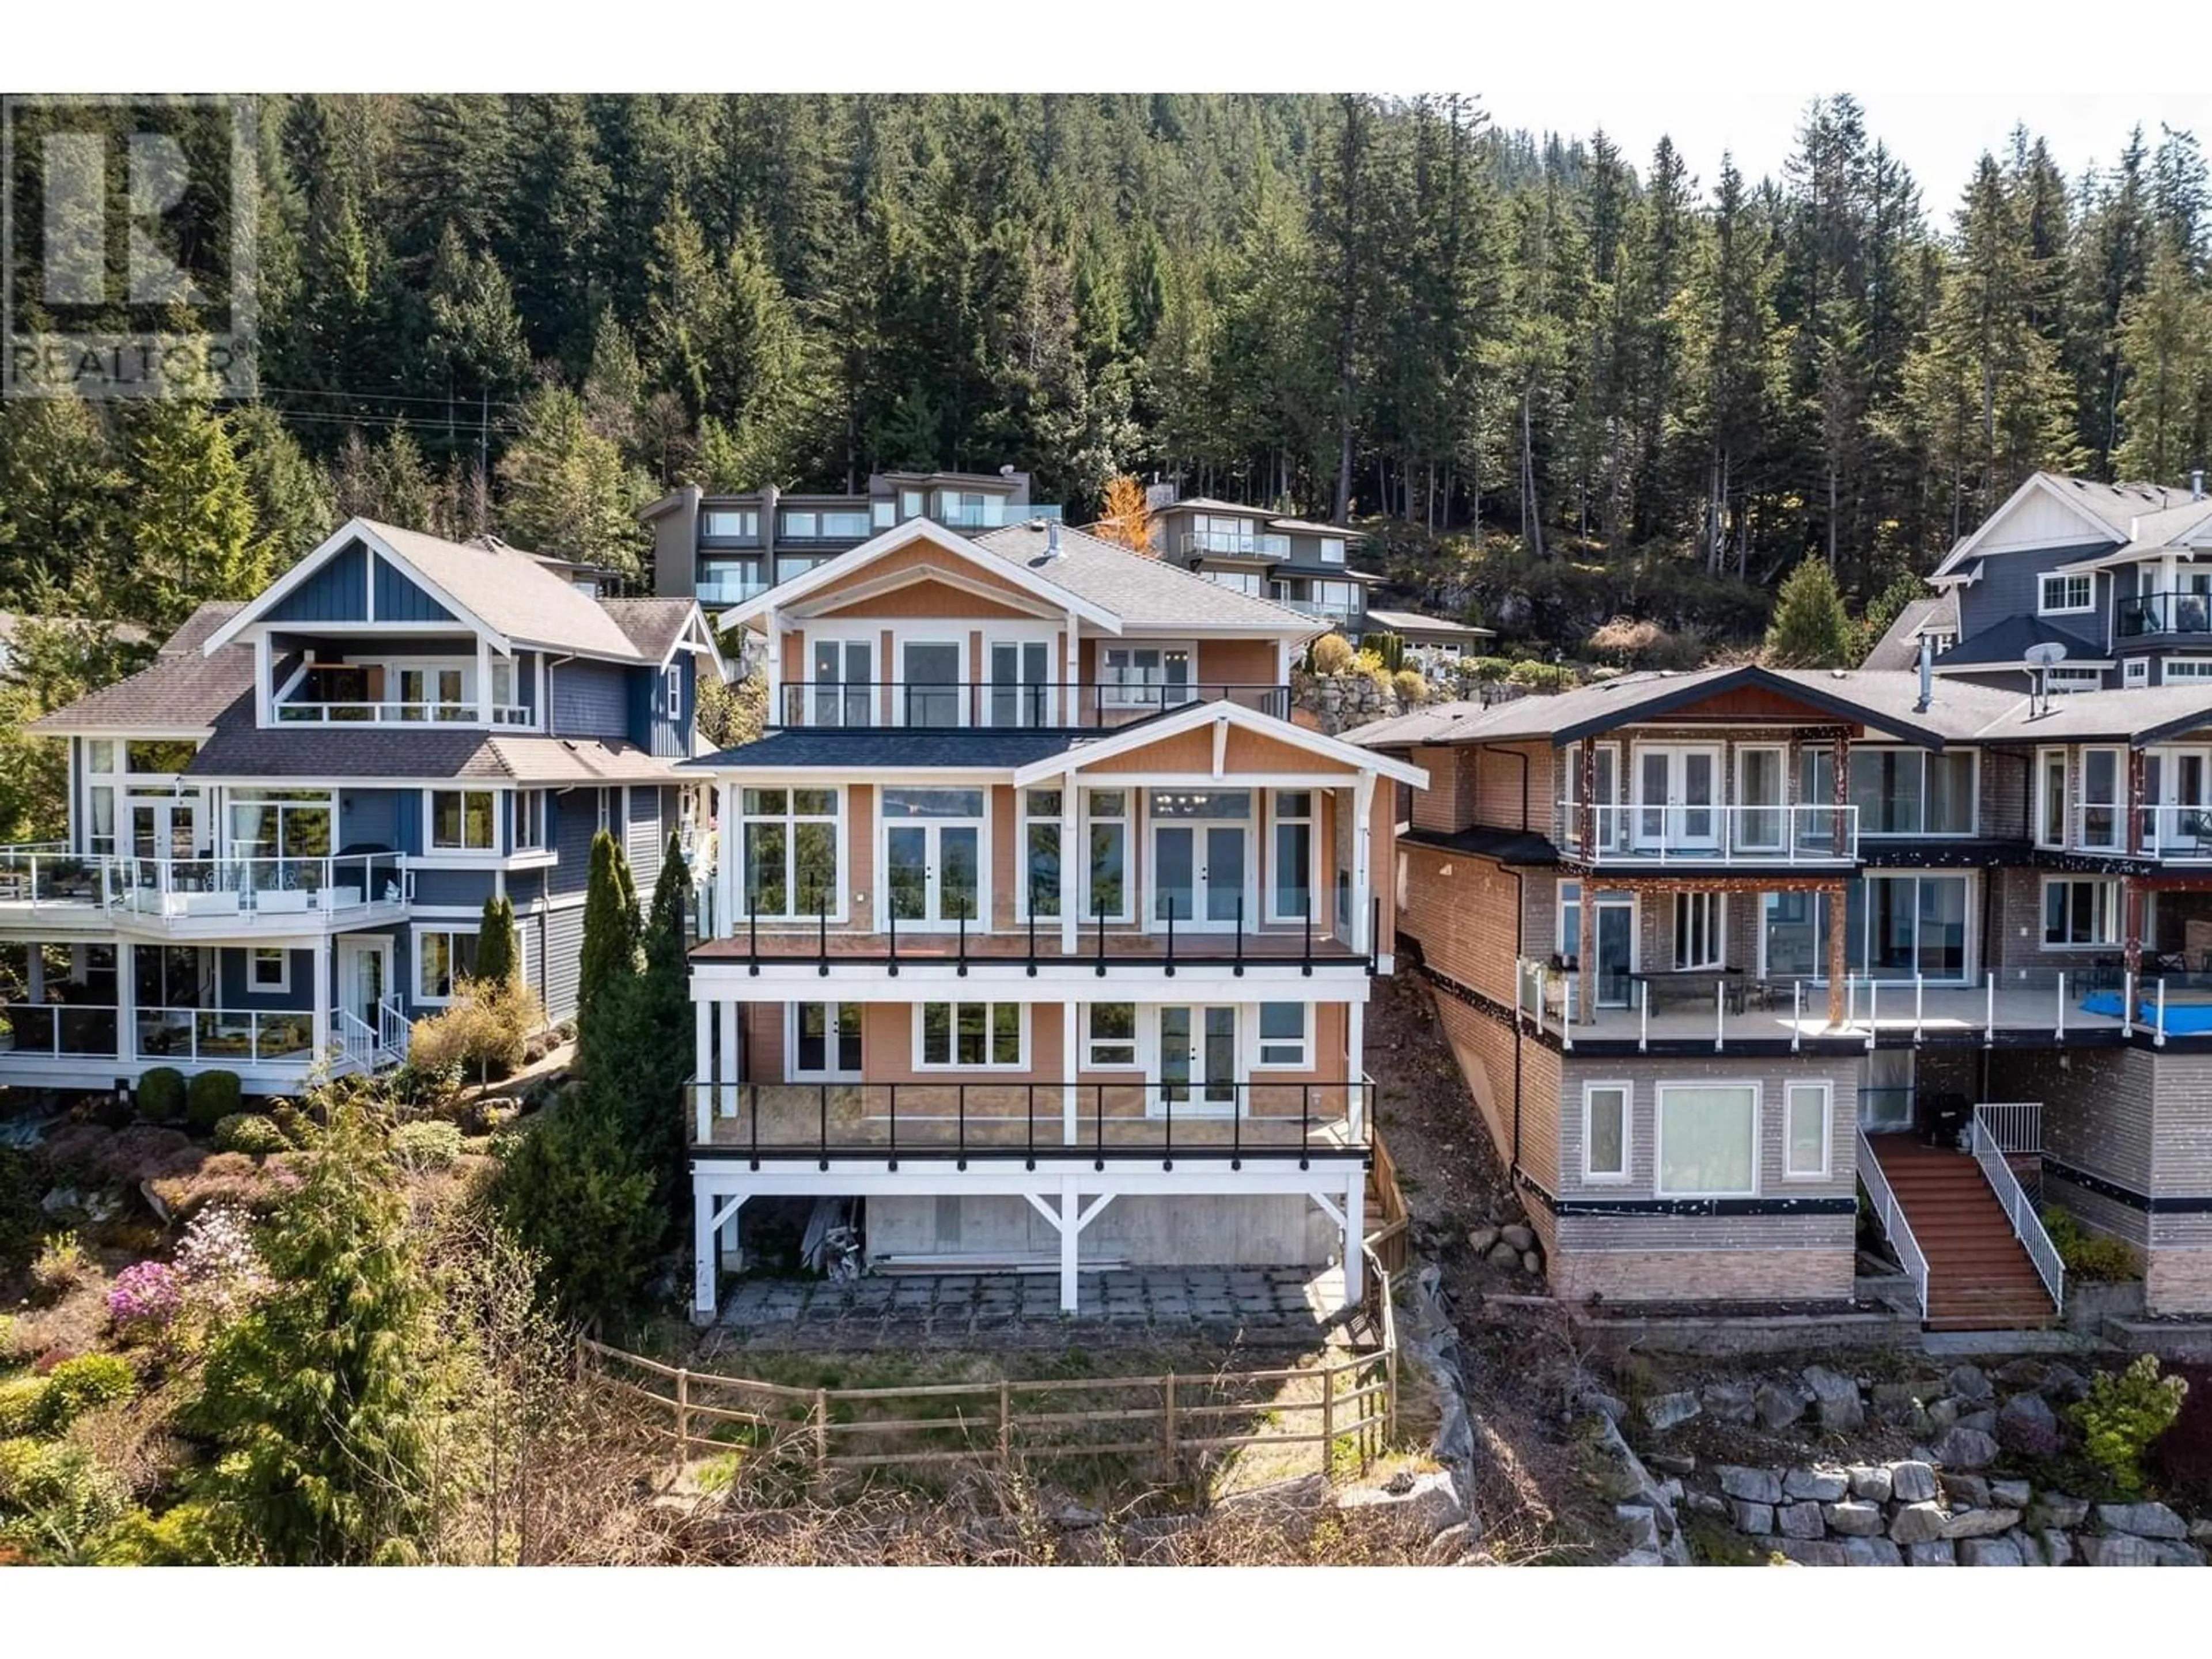 Lakeview for 40 SALAL COURT, Furry Creek British Columbia V8B1A3